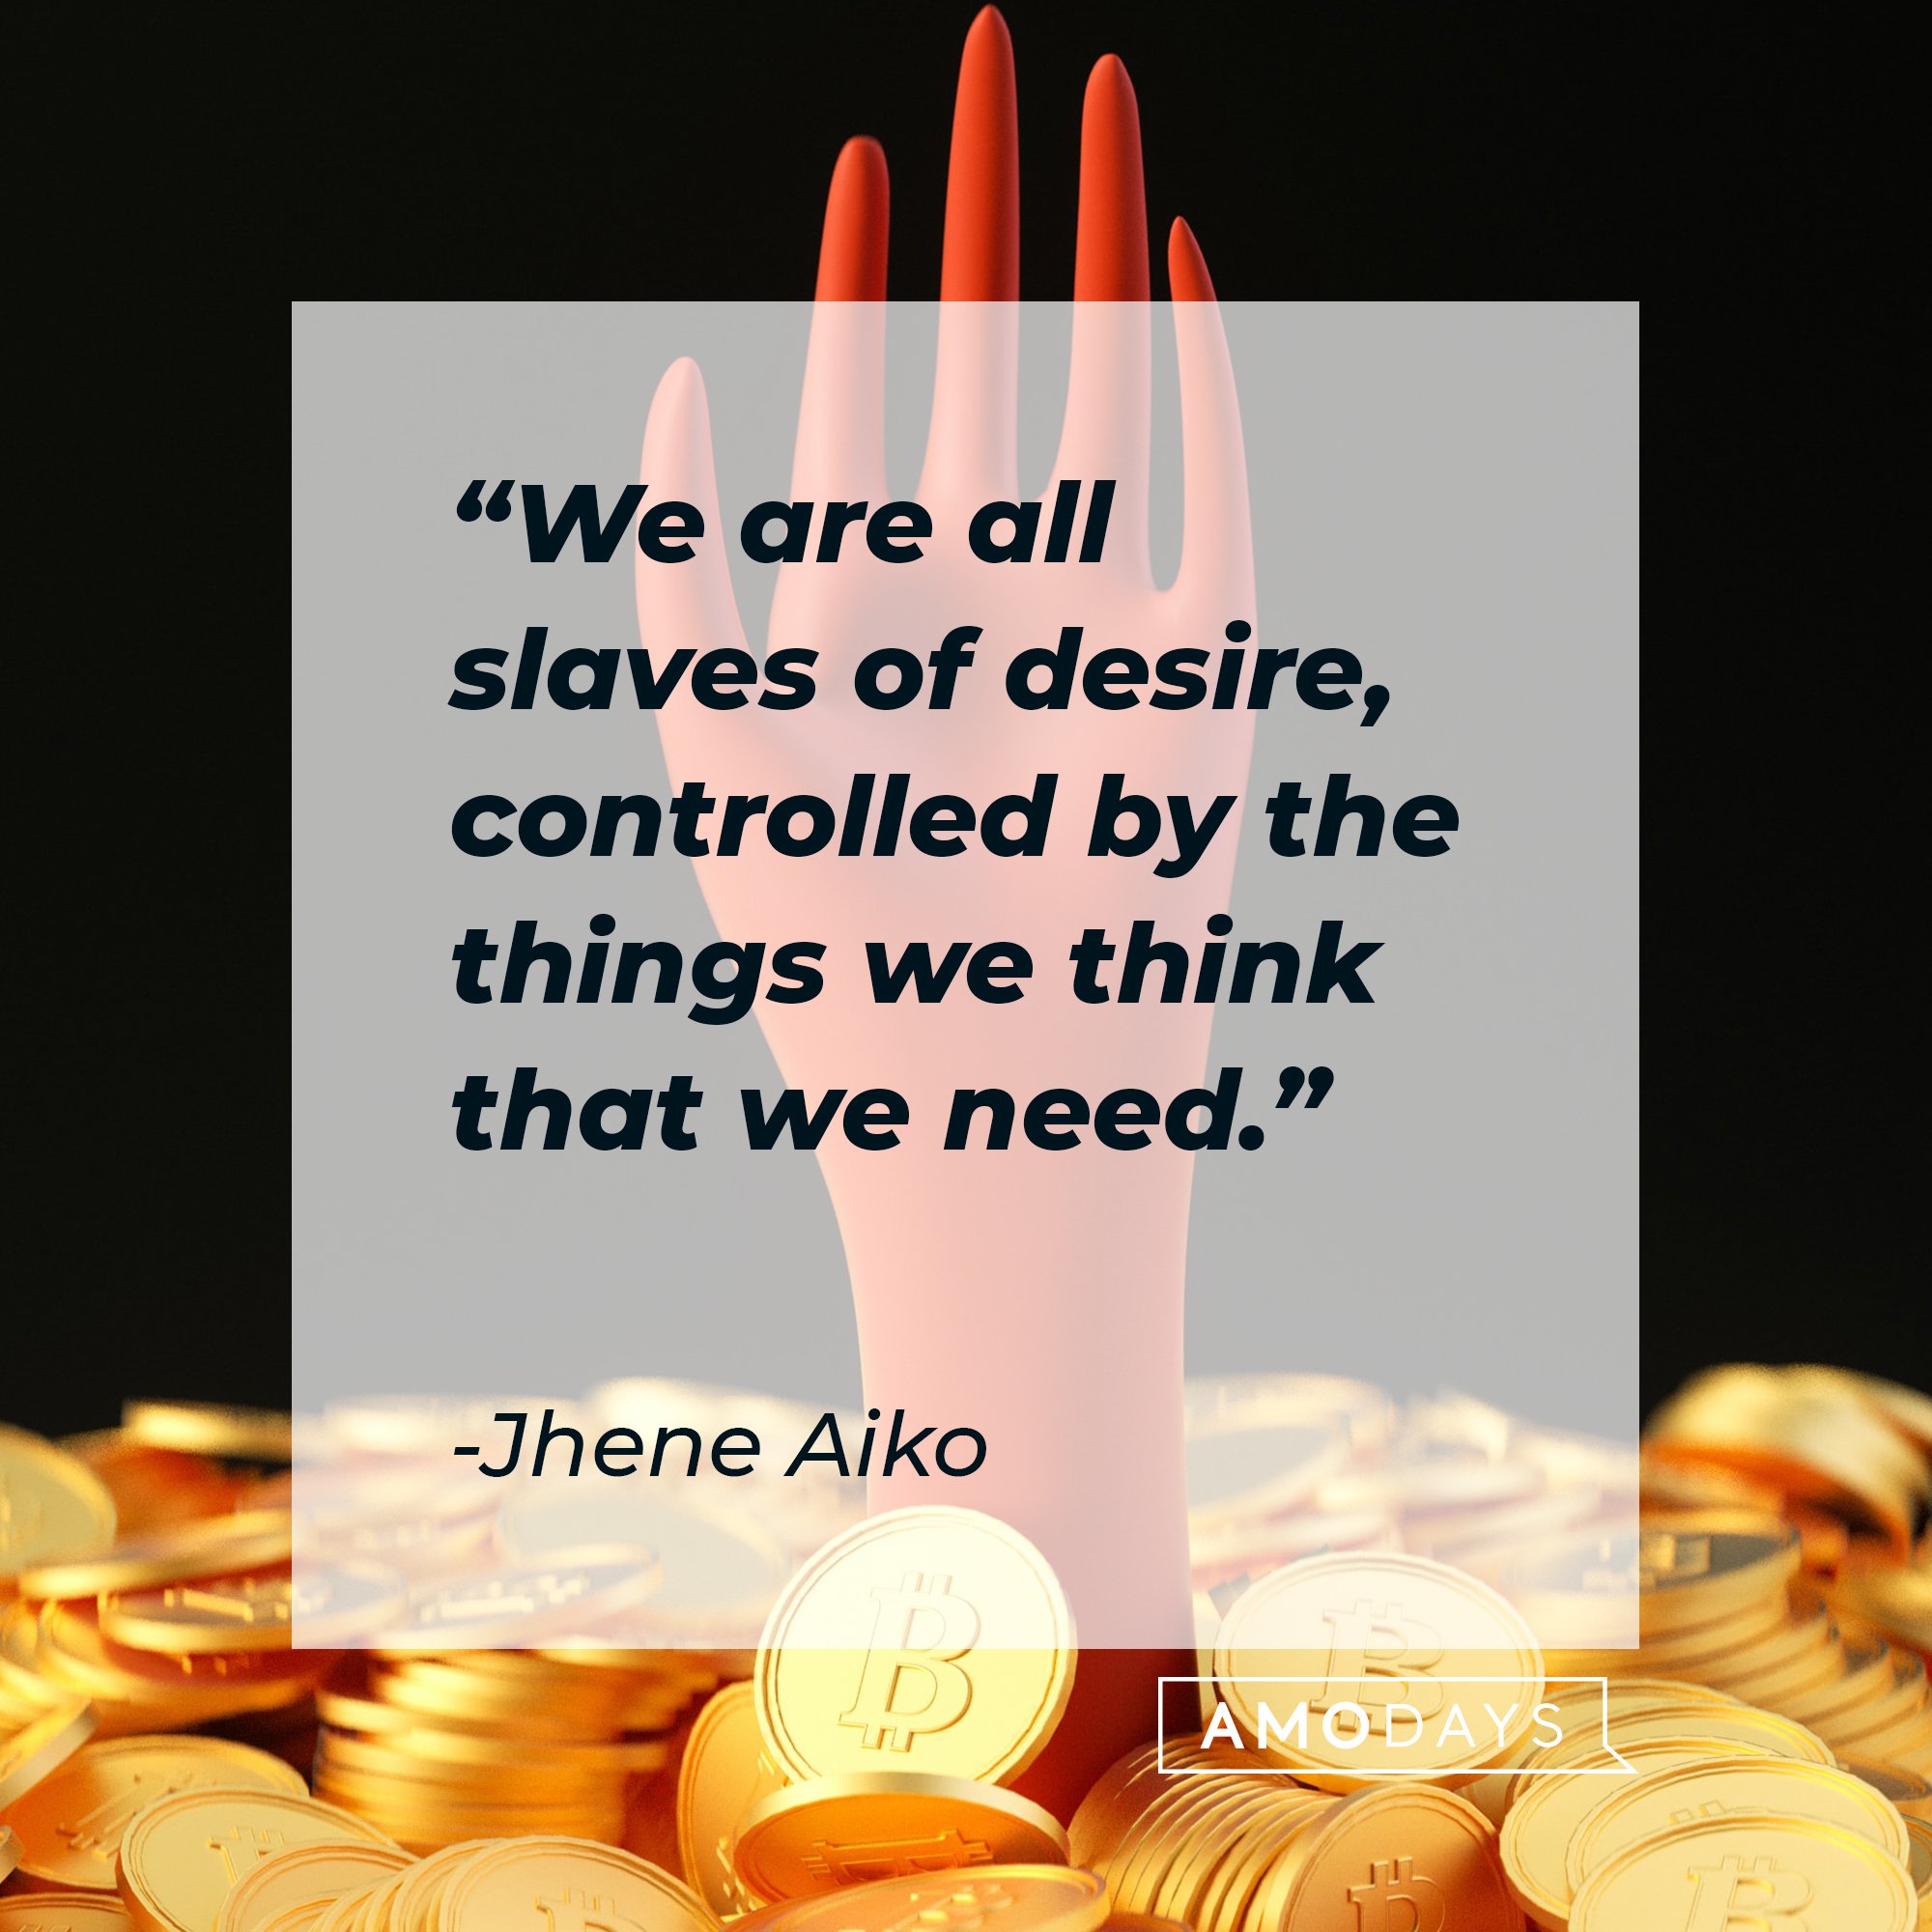  Jhene Aiko's quote: "We are all slaves of desire, controlled by the things we think that we need." | Image: AmoDays